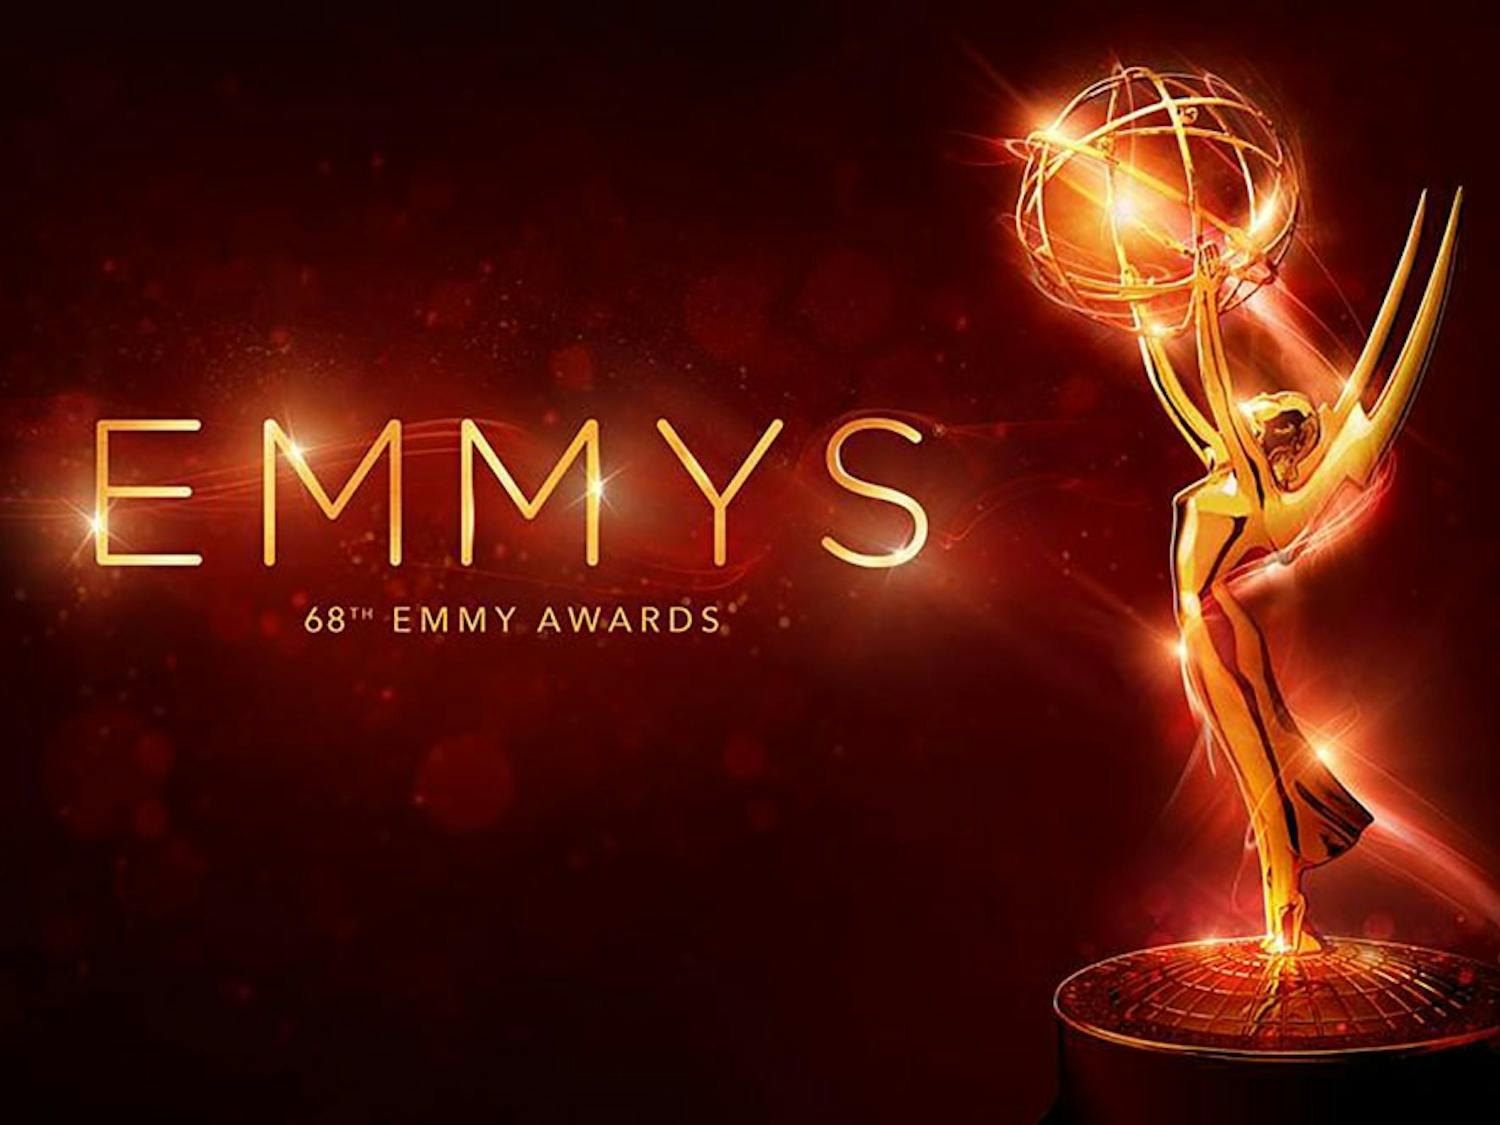 Sunday night Jimmy Kimmel hosted the 68th annual Emmy Awards. This year's pool of award winners was the most diverse to date.